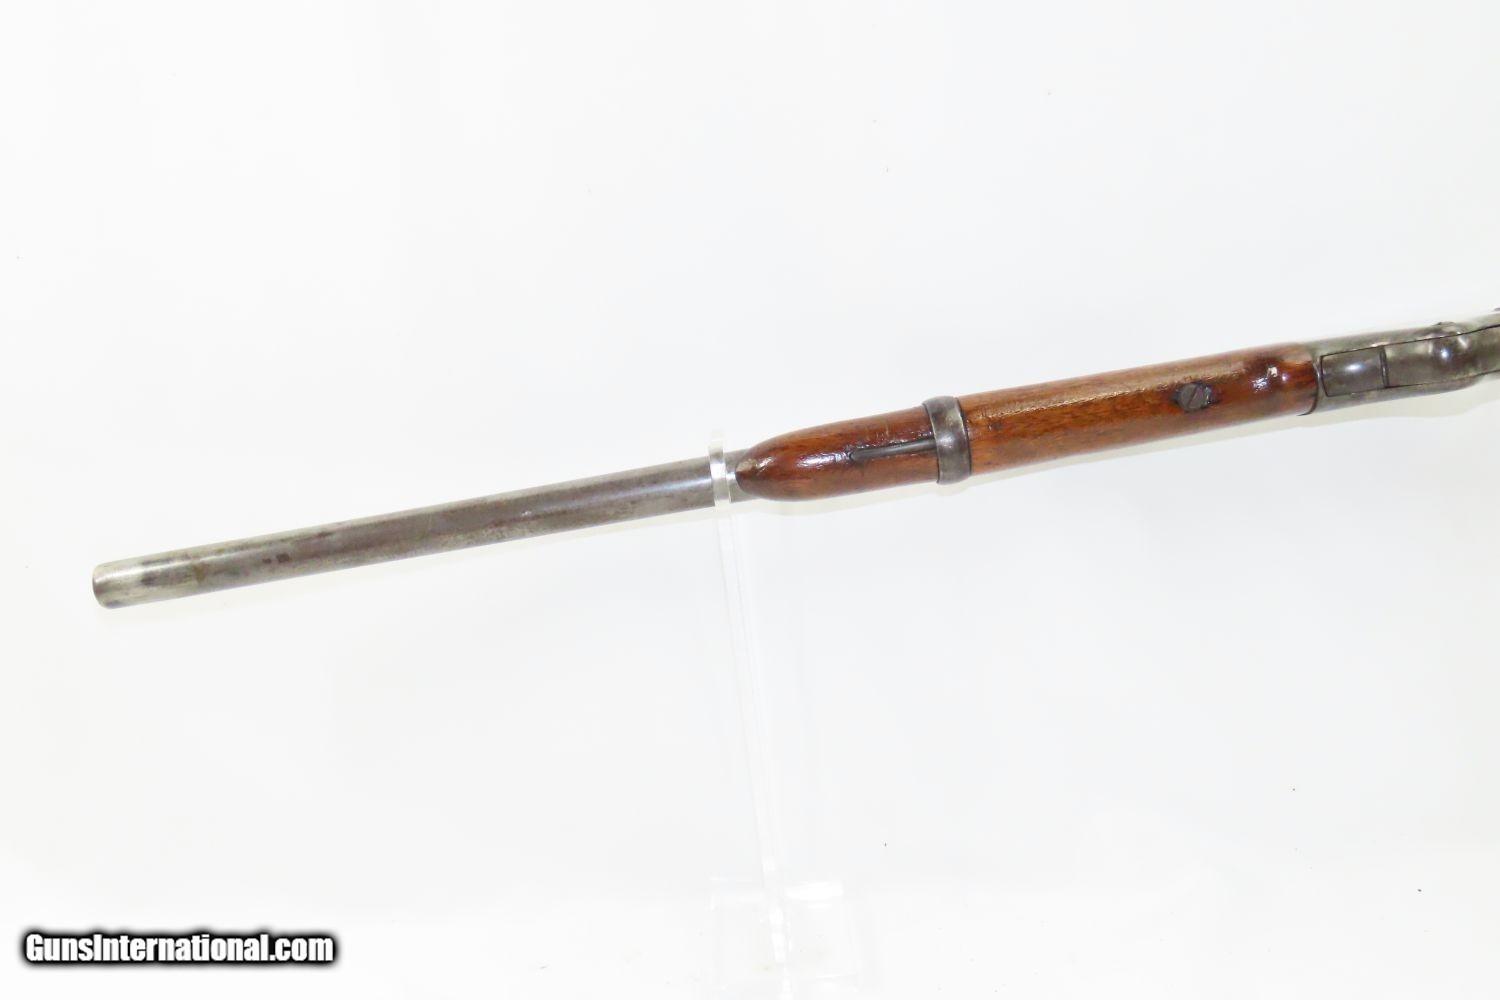 https://images.gunsinternational.com/listings_sub/acc_87874/gi_101696954/Antique-SPENCER-REPEATING-RIFLE-CO-Saddle-Ring-CARBINE-Early-Repeater-Famous-During-Civil-War-and-Wi_101696954_87874_9620C6777E989406.jpg